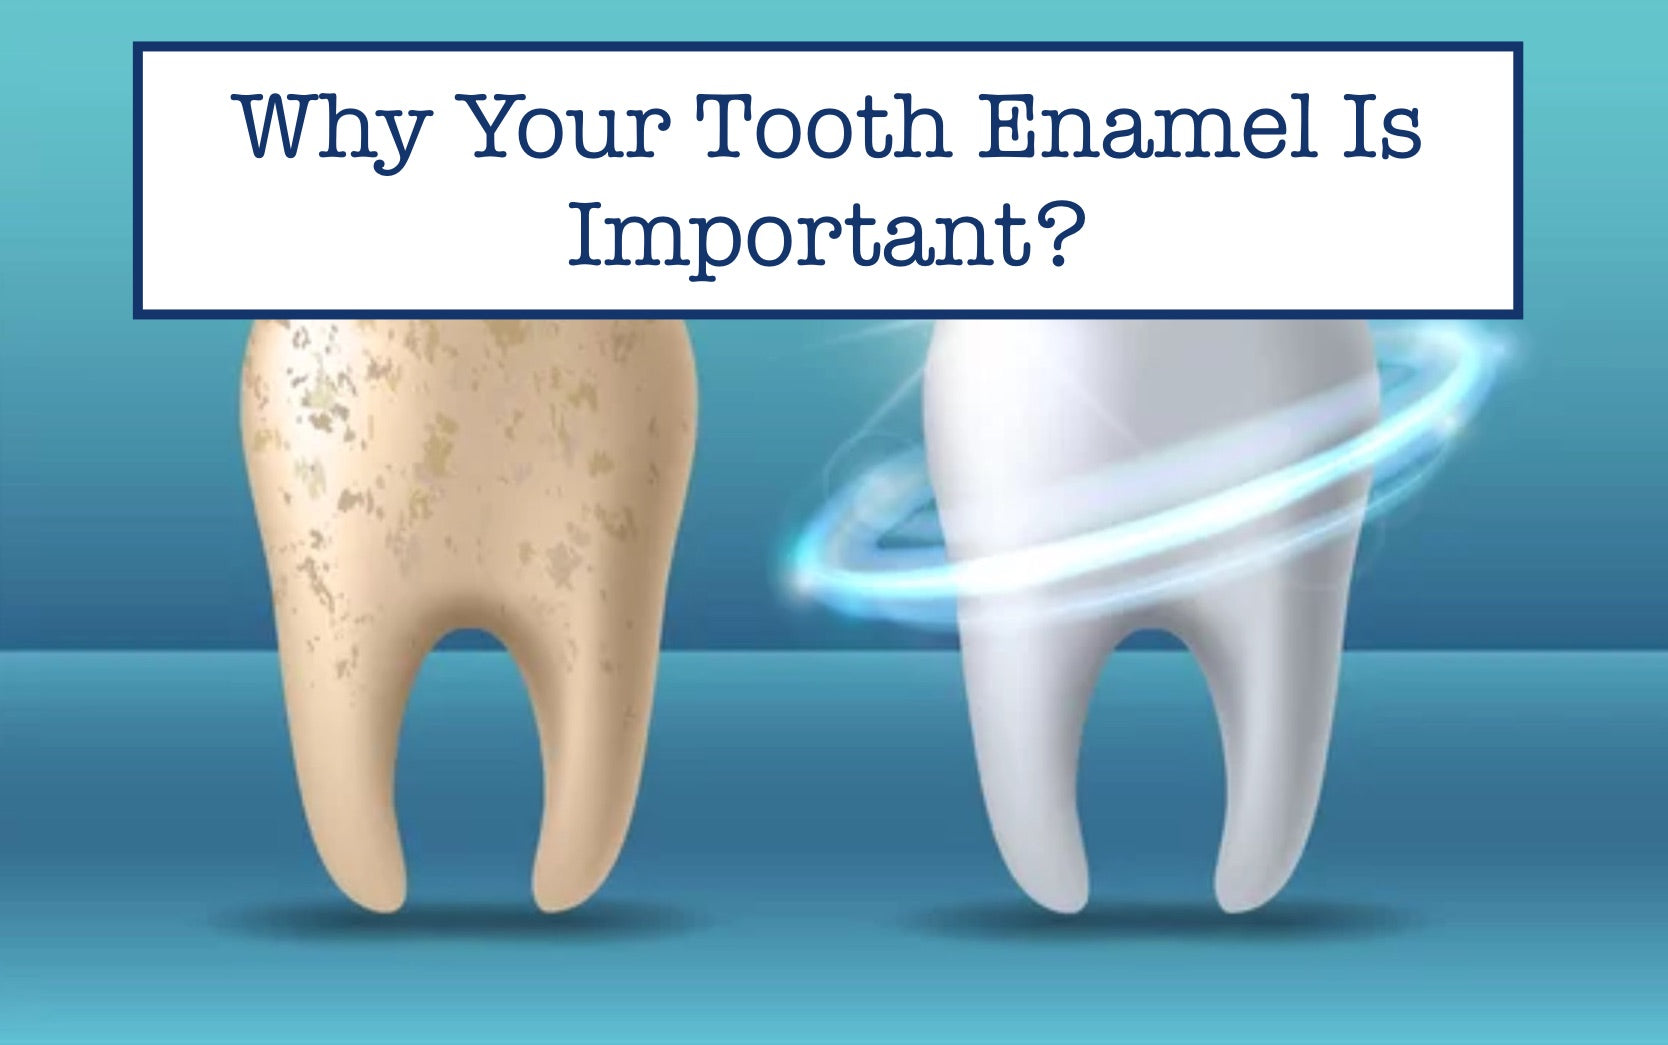 Why Your Tooth Enamel Is Important?